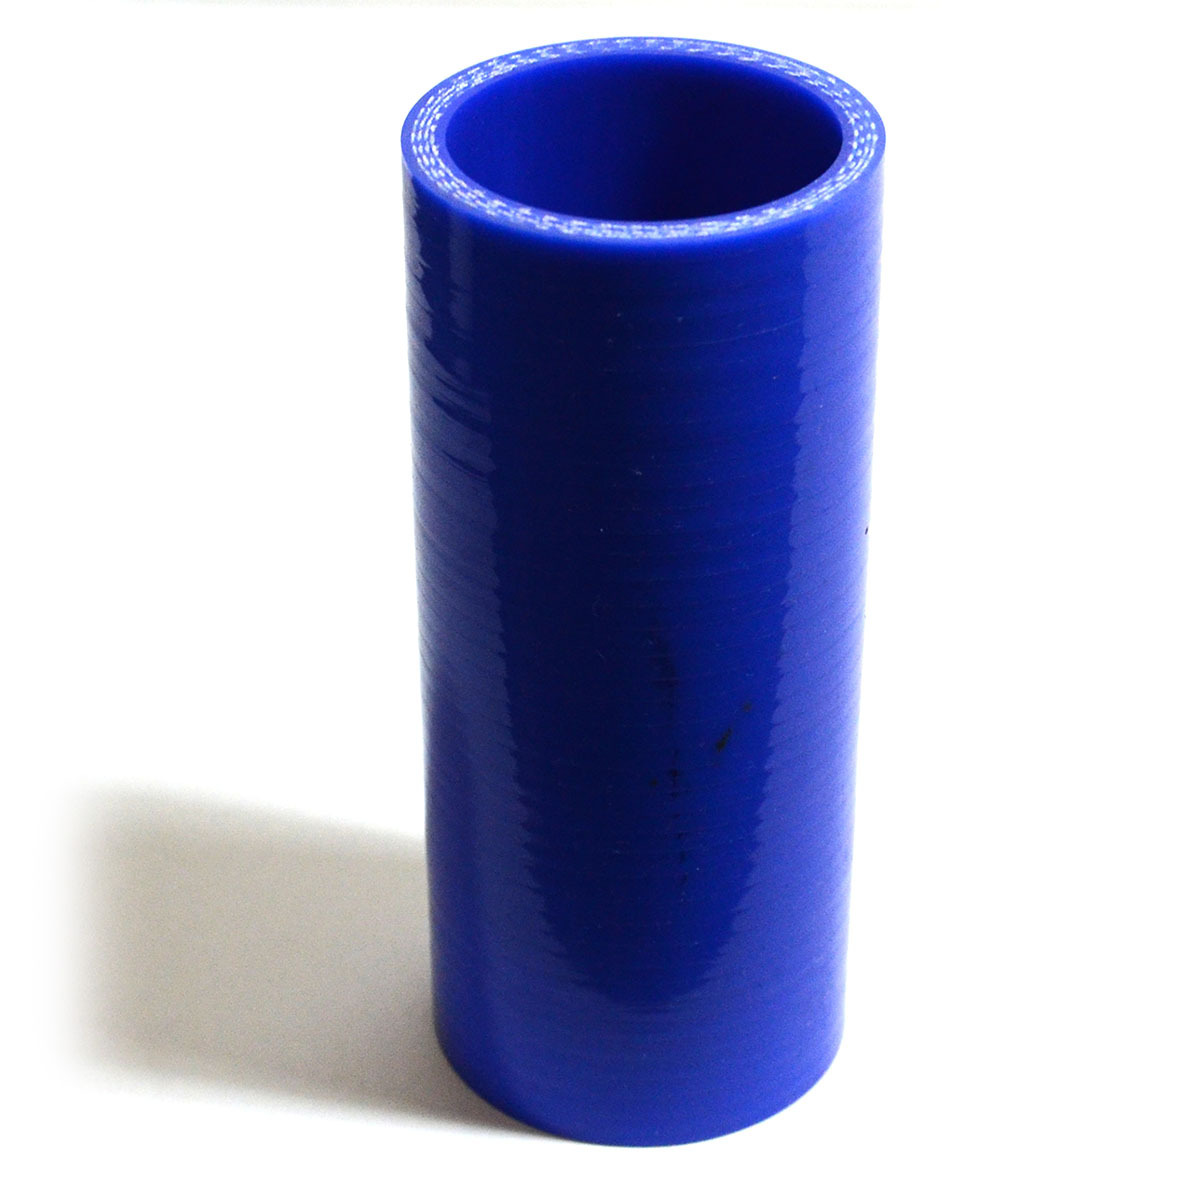 Straight 4 Ply Silicone Hose 51mm x 51mm x 127mm Blue